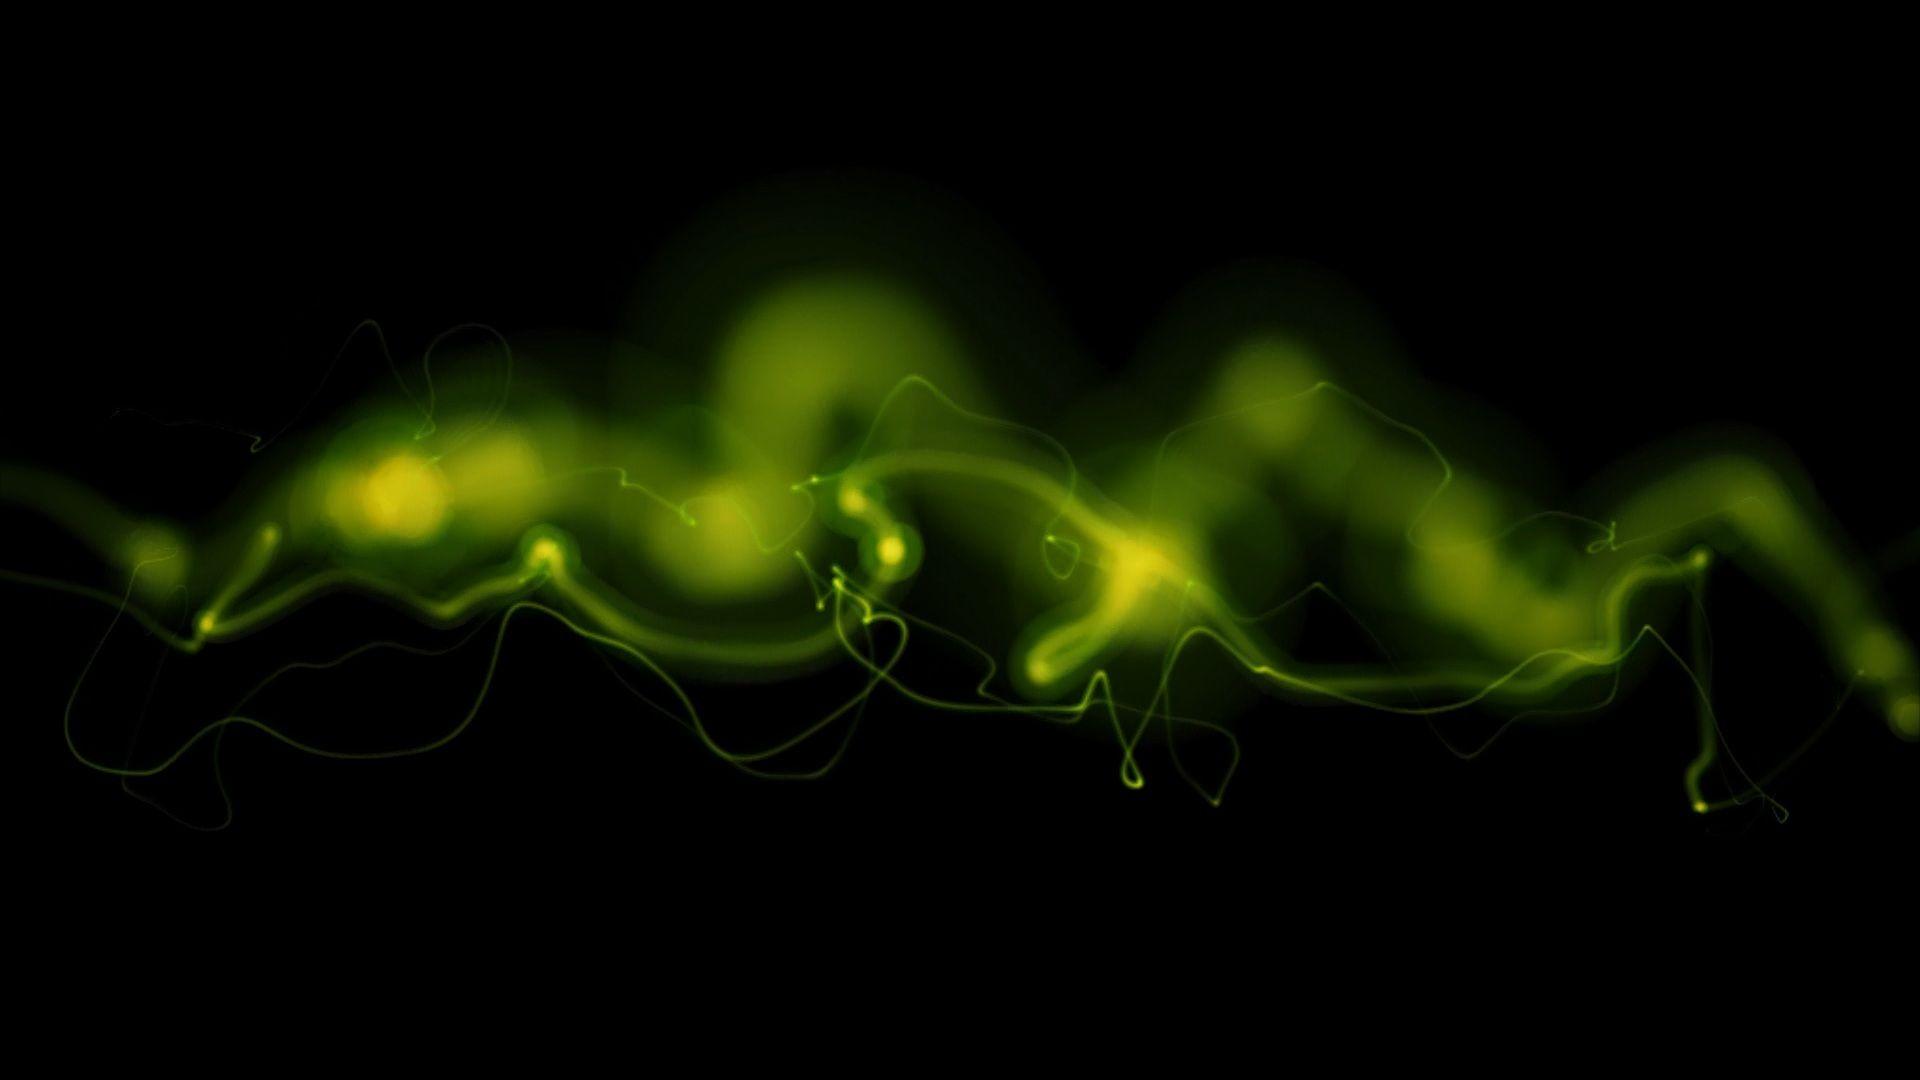 Abstract Sound Wallpaper 42121 1920x1080px